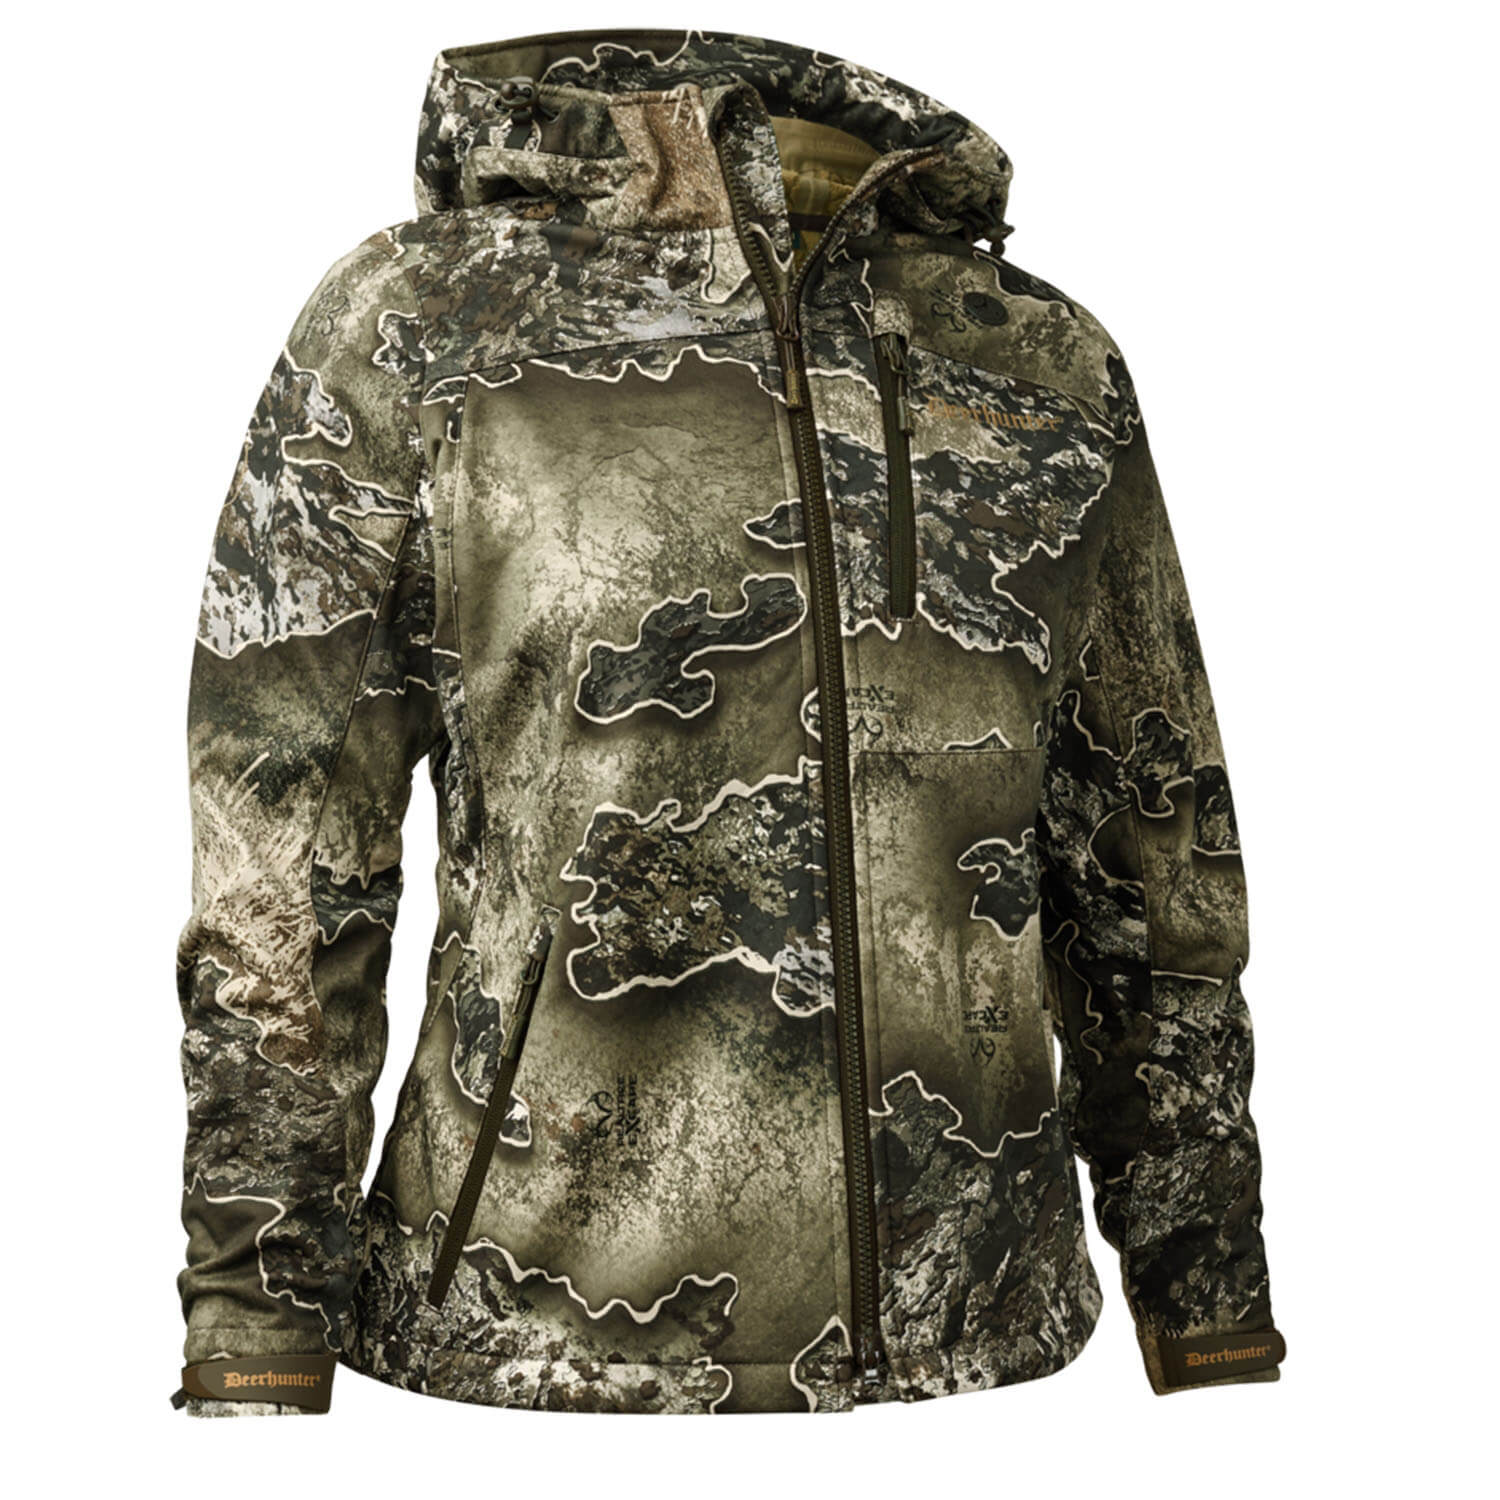 Deerhunter Softshell Jacket Lady Excape (realtree excape) - For Ladies